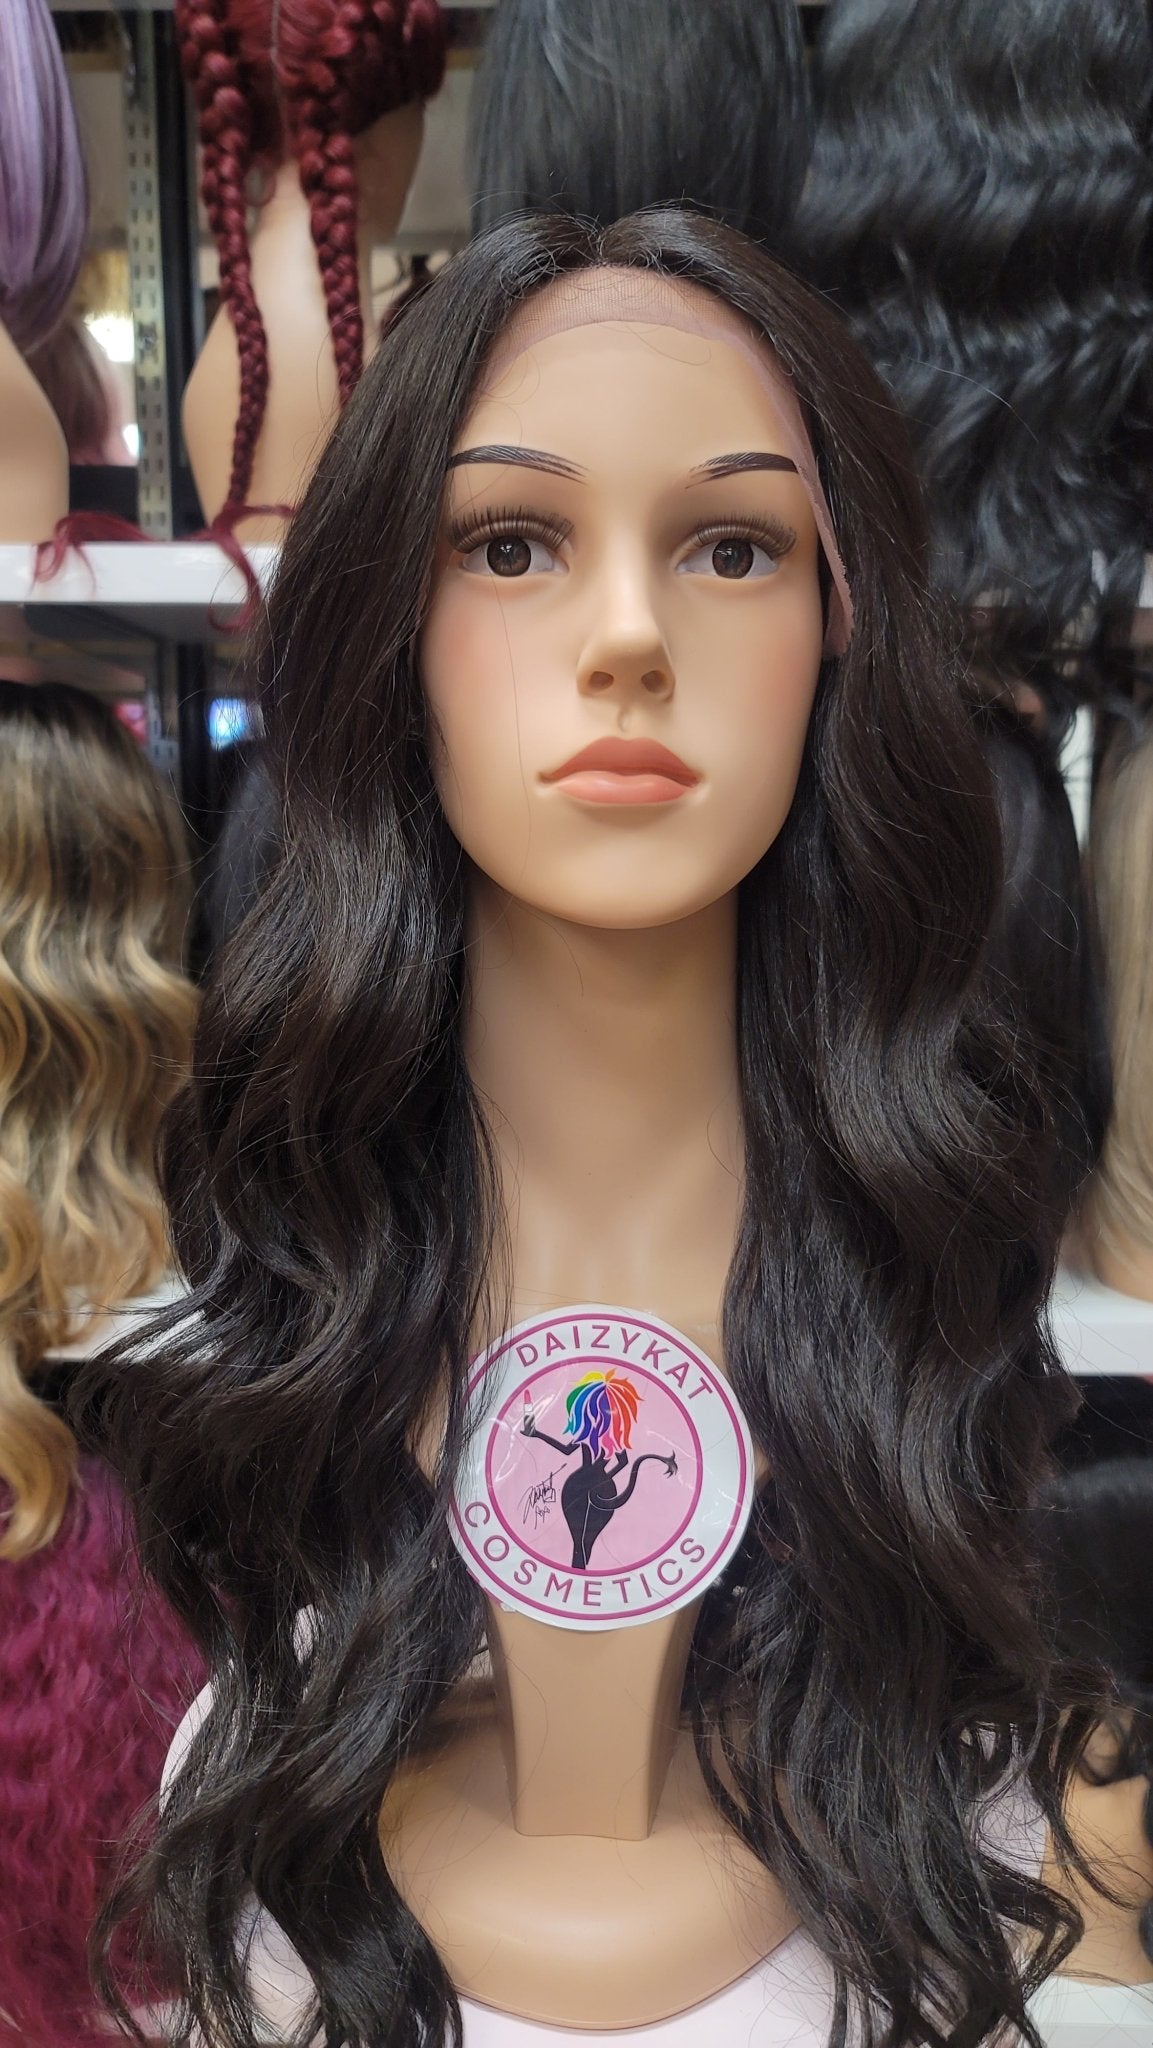 136 Nadia - Middle Part Lace Front Wig Human Hair Blend- 2 - DaizyKat Cosmetics 136 Nadia - Middle Part Lace Front Wig Human Hair Blend- 2 DaizyKat Cosmetics Wigs